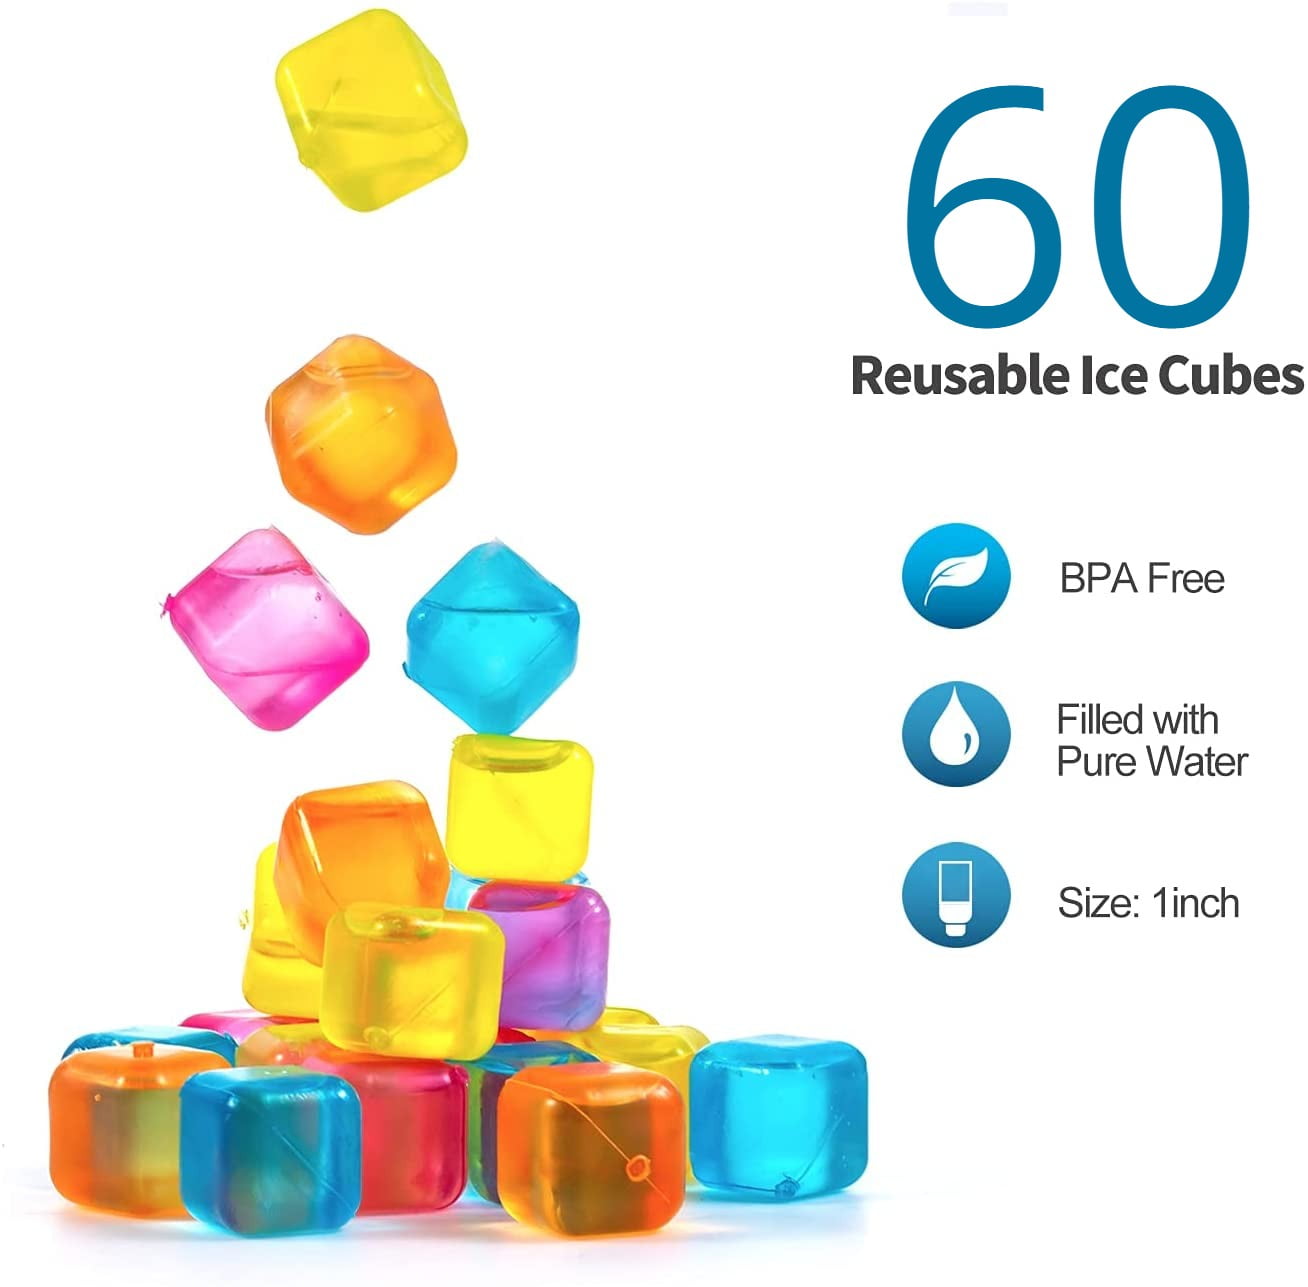  Reusable Plastic Ice Cubes 25 Pack Colorful